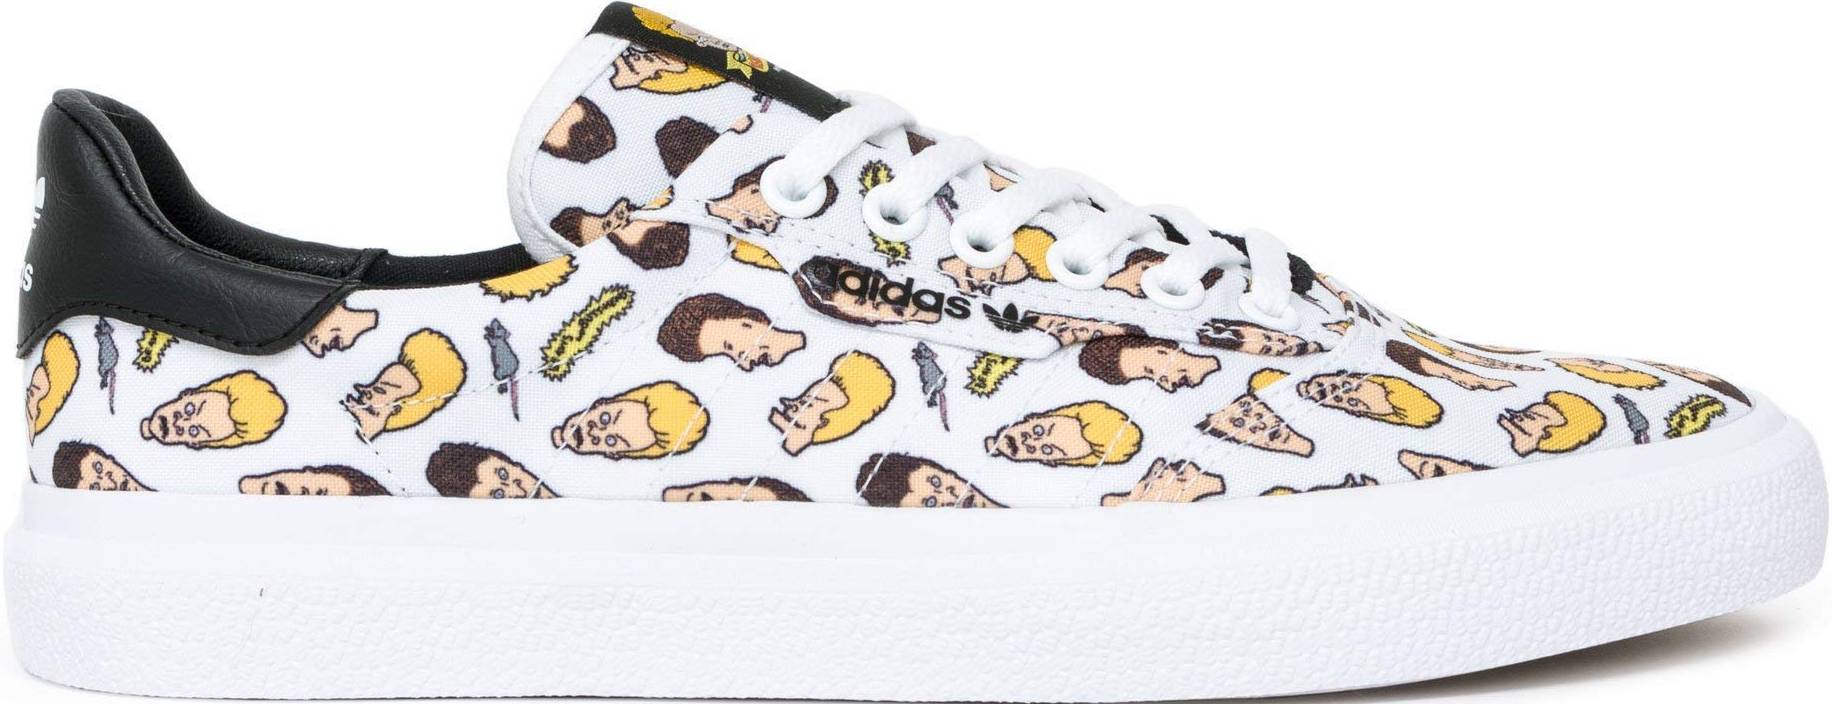 adidas beavis and butthead sneakers